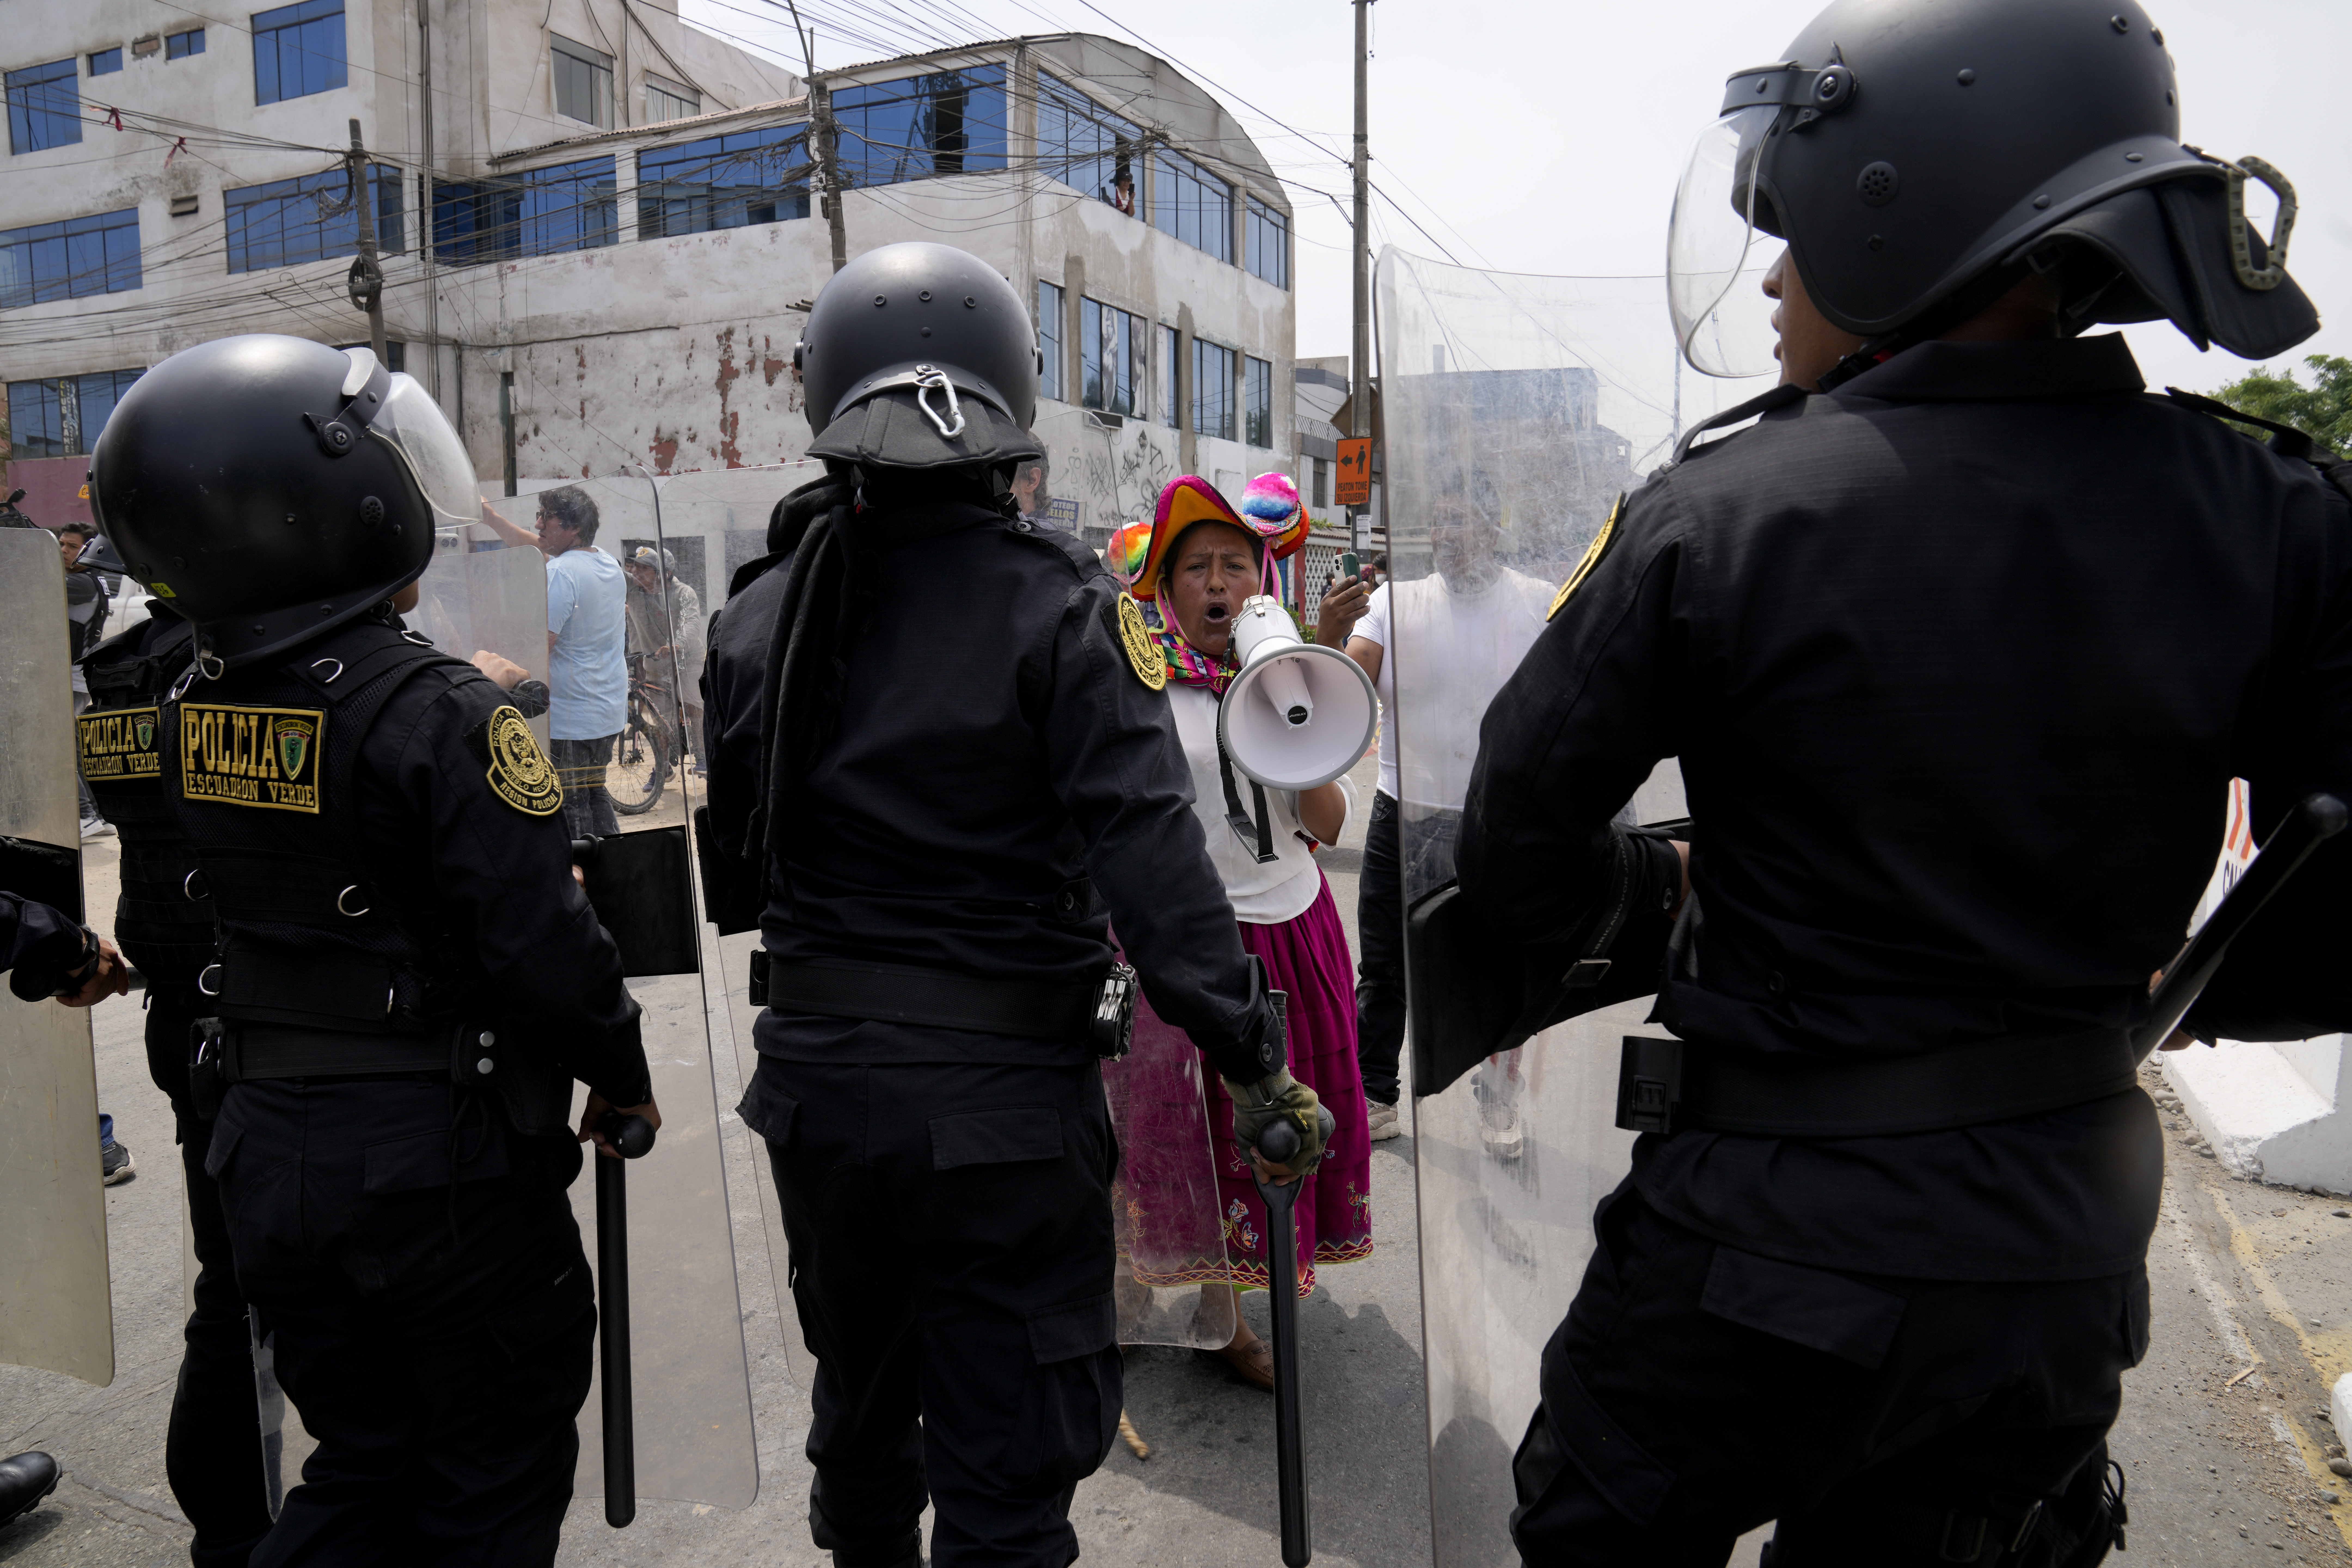 An anti-government protester challenges police surrounding the San Marcos University in Lima, Peru, Saturday, Jan. 21, 2023. Police evicted from the university grounds protesters who arrived from Andean regions seeking the resignation of President Dina Boluarte, the release from prison of ousted President Pedro Castillo and immediate elections. (AP Photo/Martin Mejia)